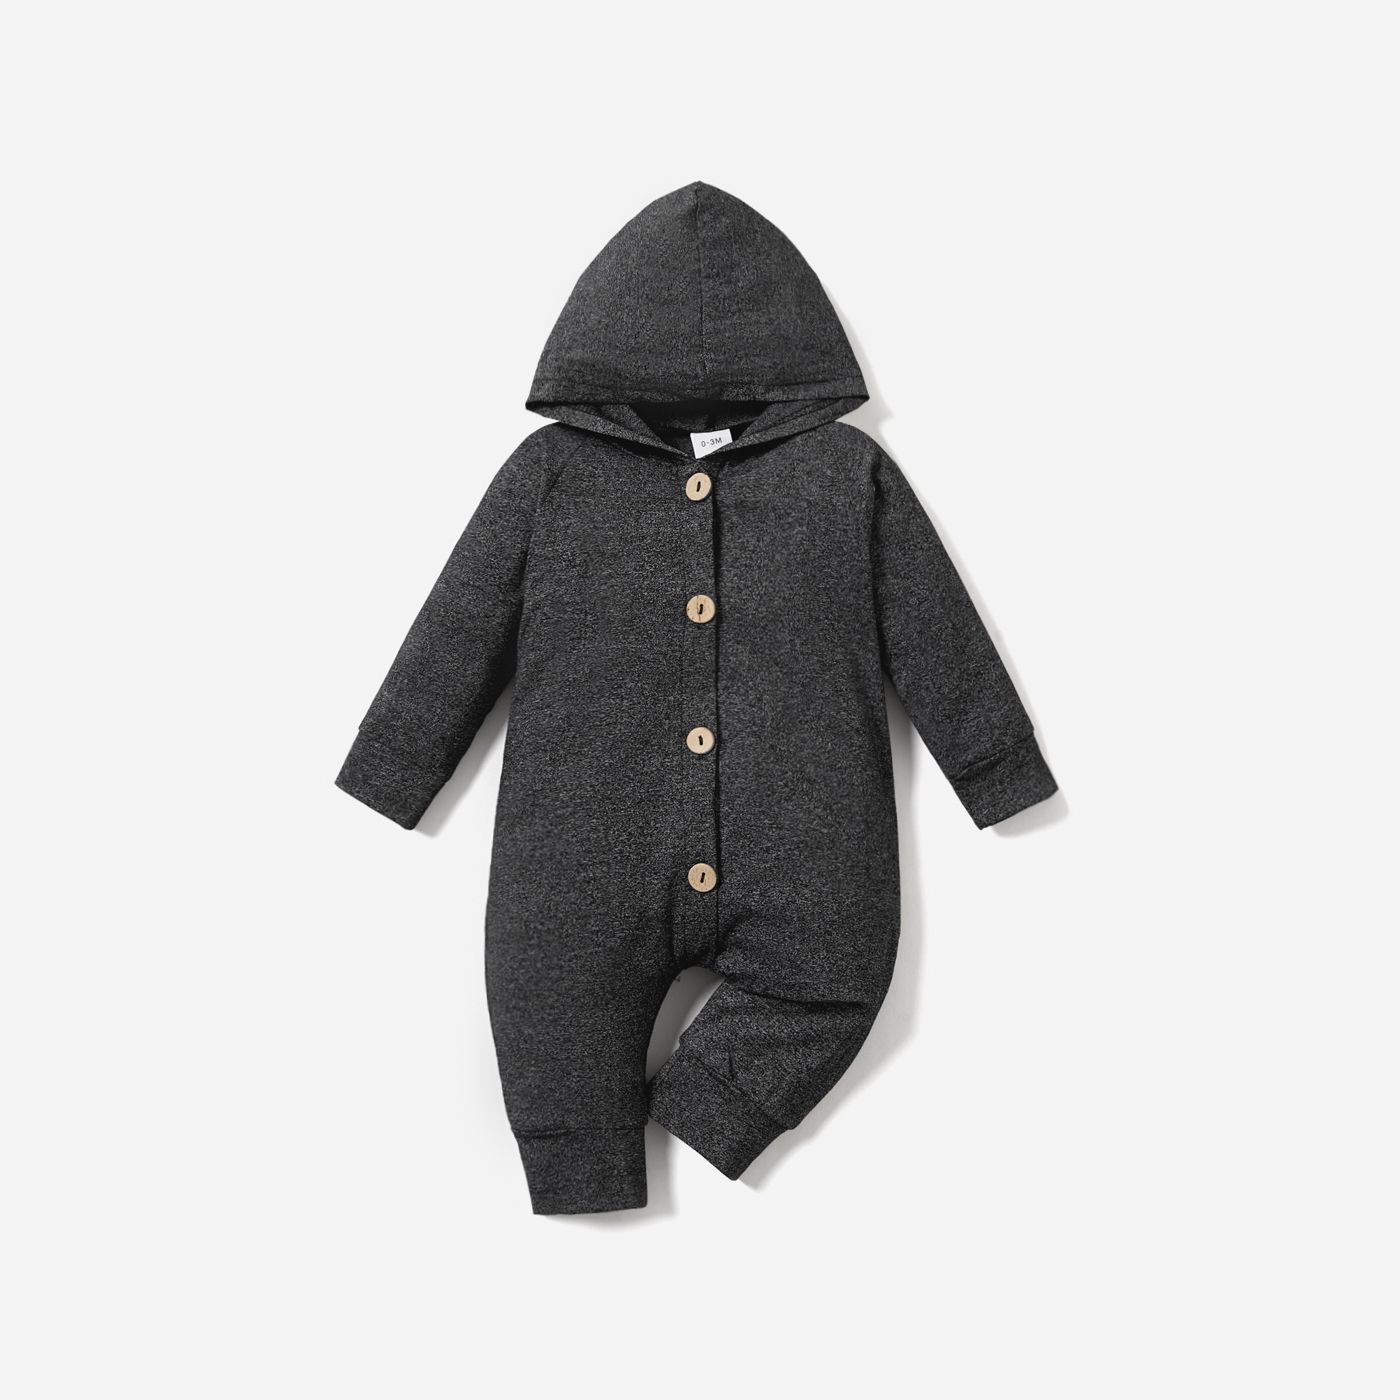 Solid Hooded Long-sleeve Baby Jumpsuit